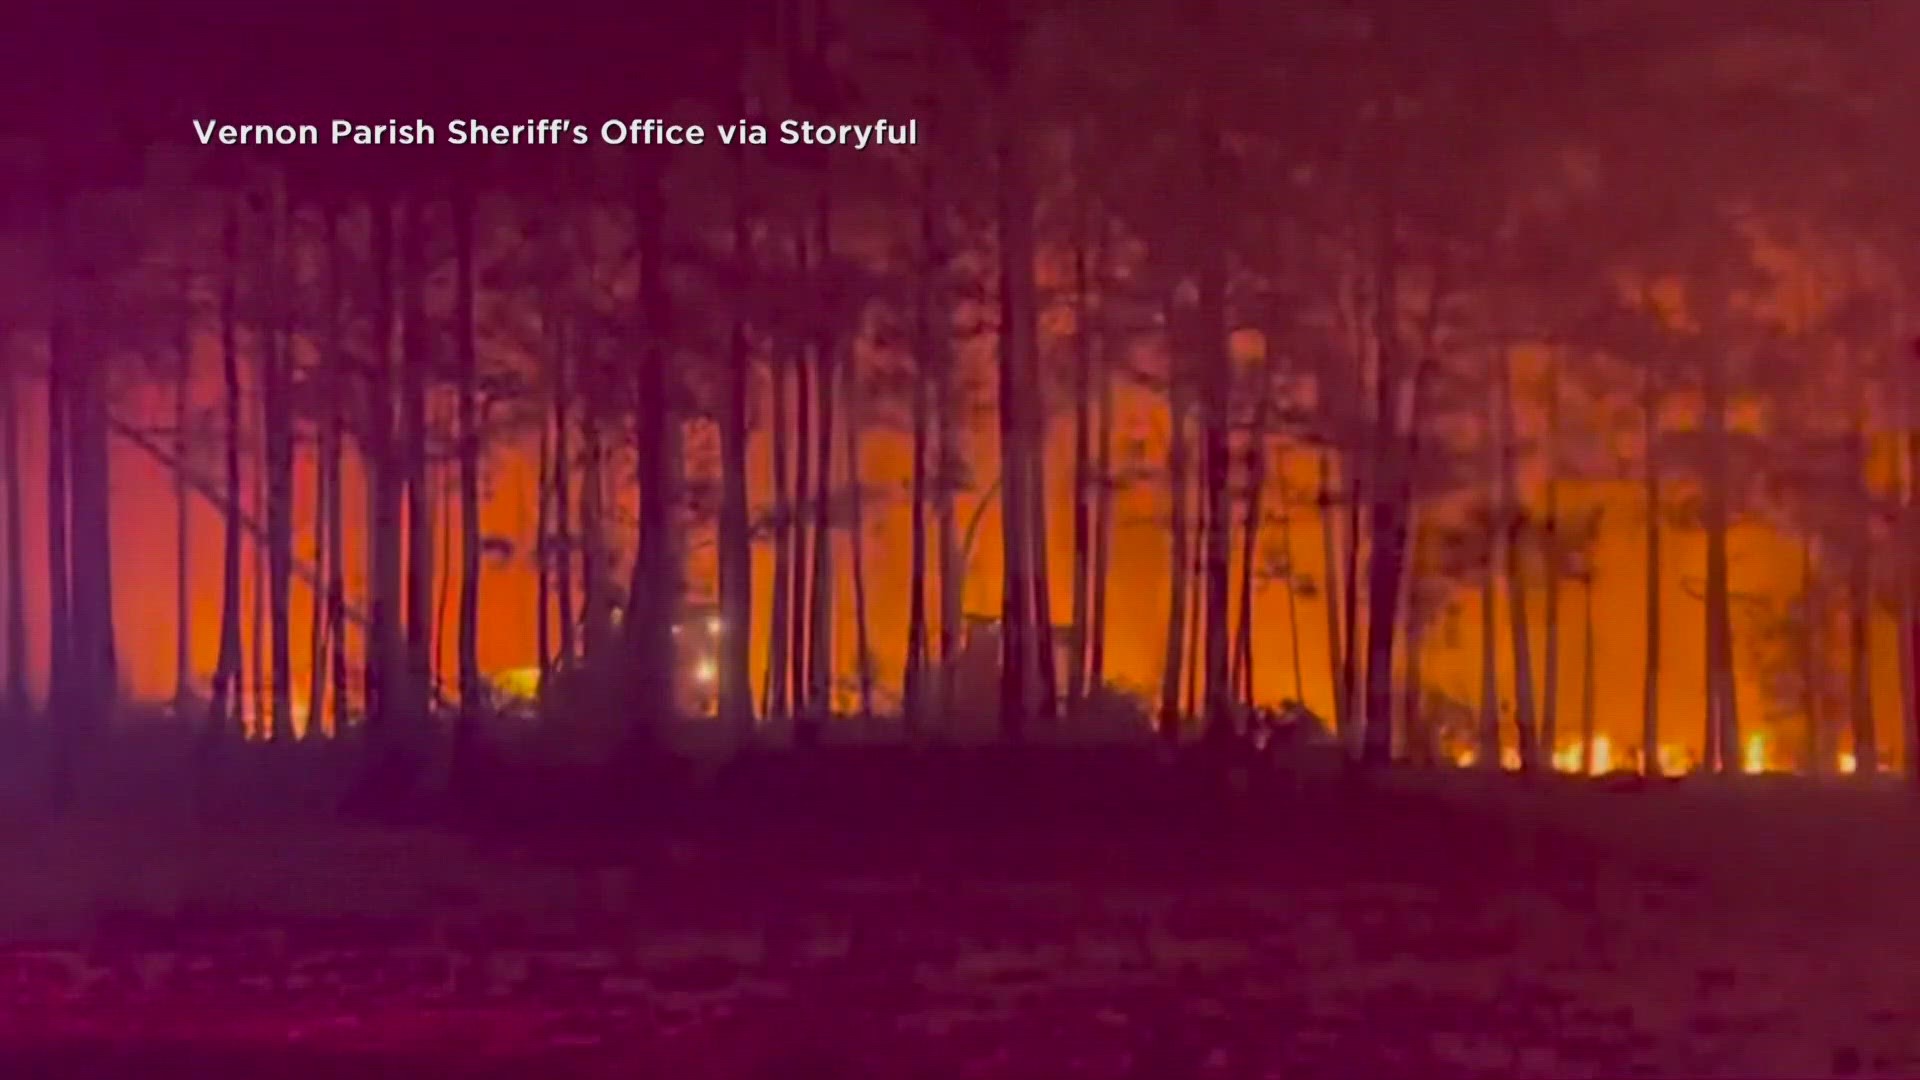 There are multiple wildfires burning in Louisiana, including the largest one ever recorded in the state.